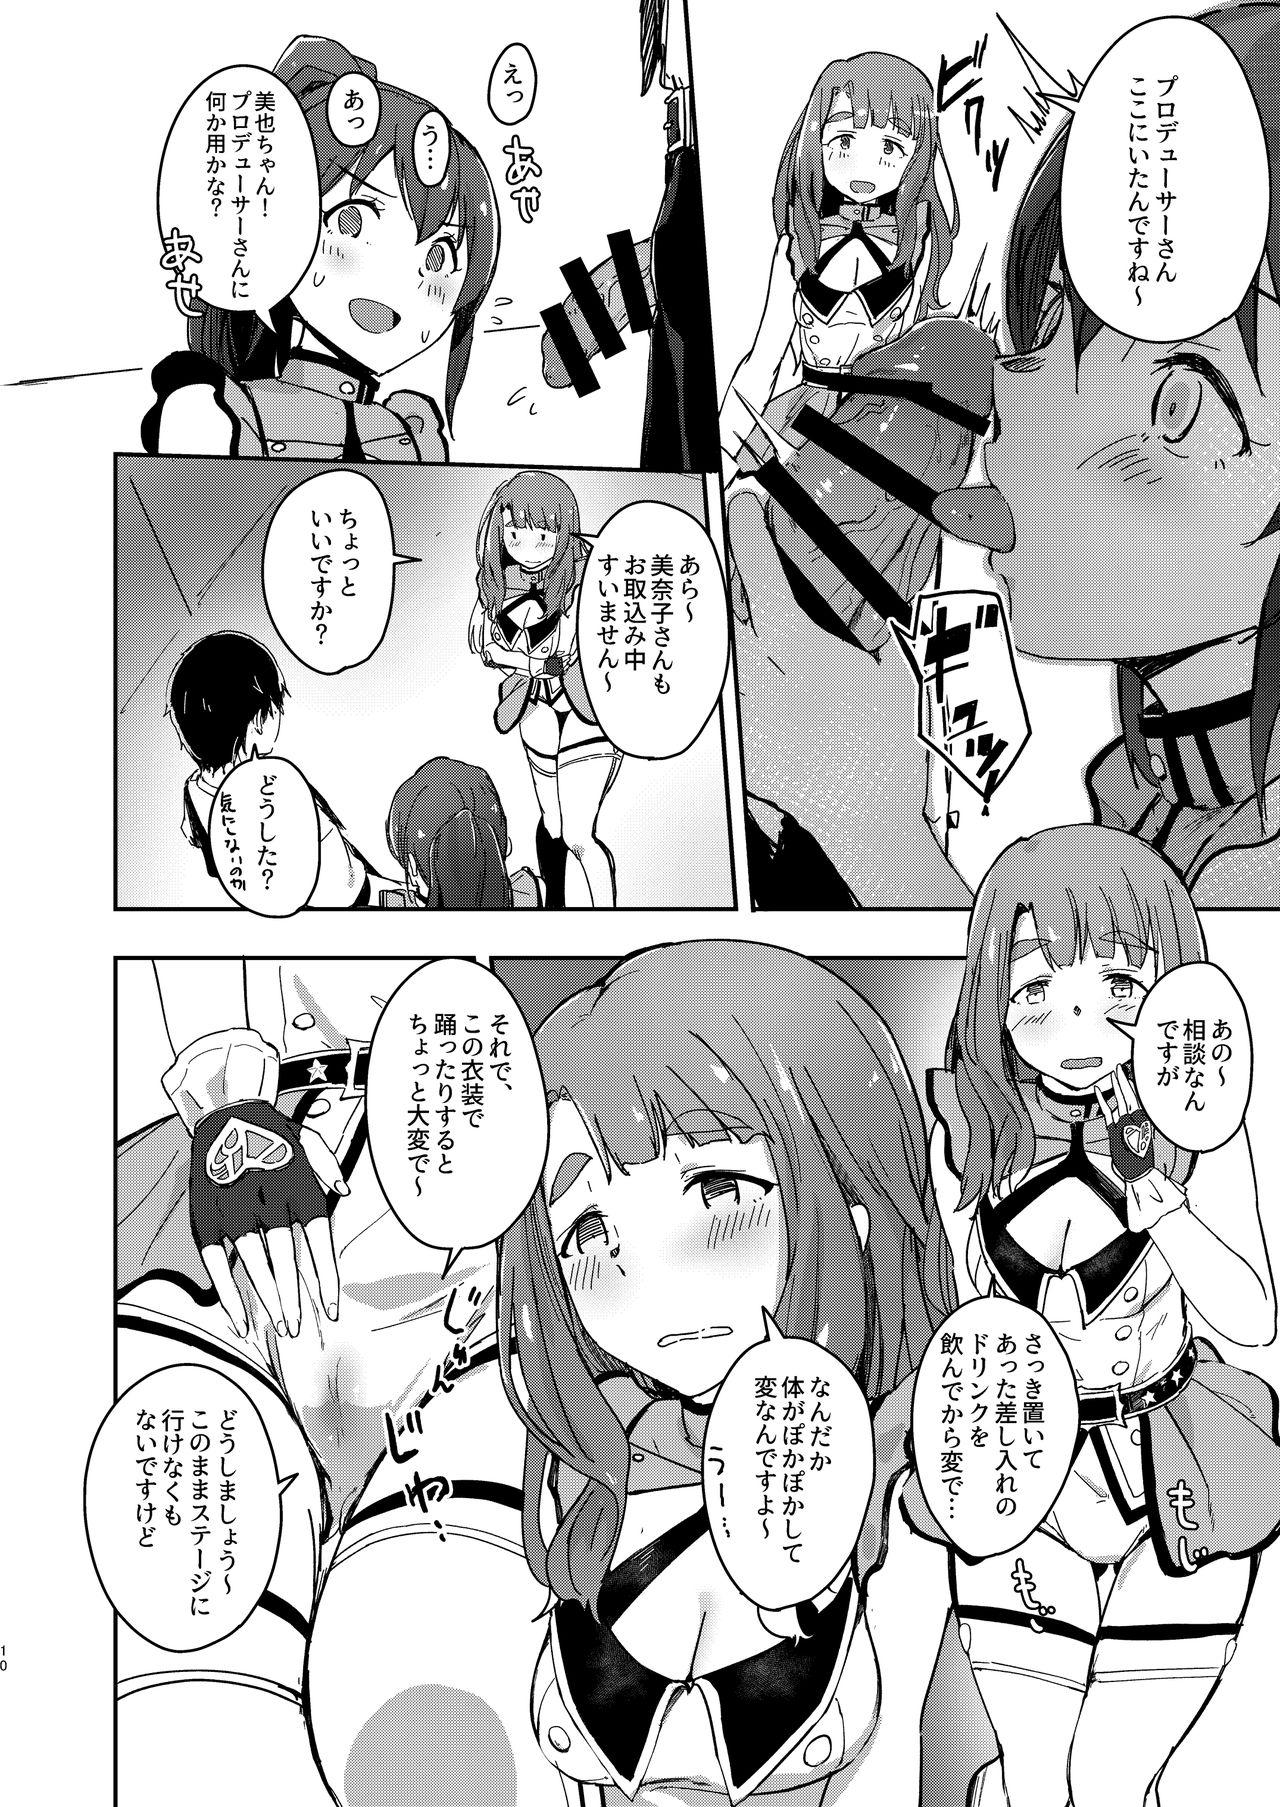 Huge Dick TOP! CLOVER BOOK + omake - The idolmaster Blowjob Contest - Page 9